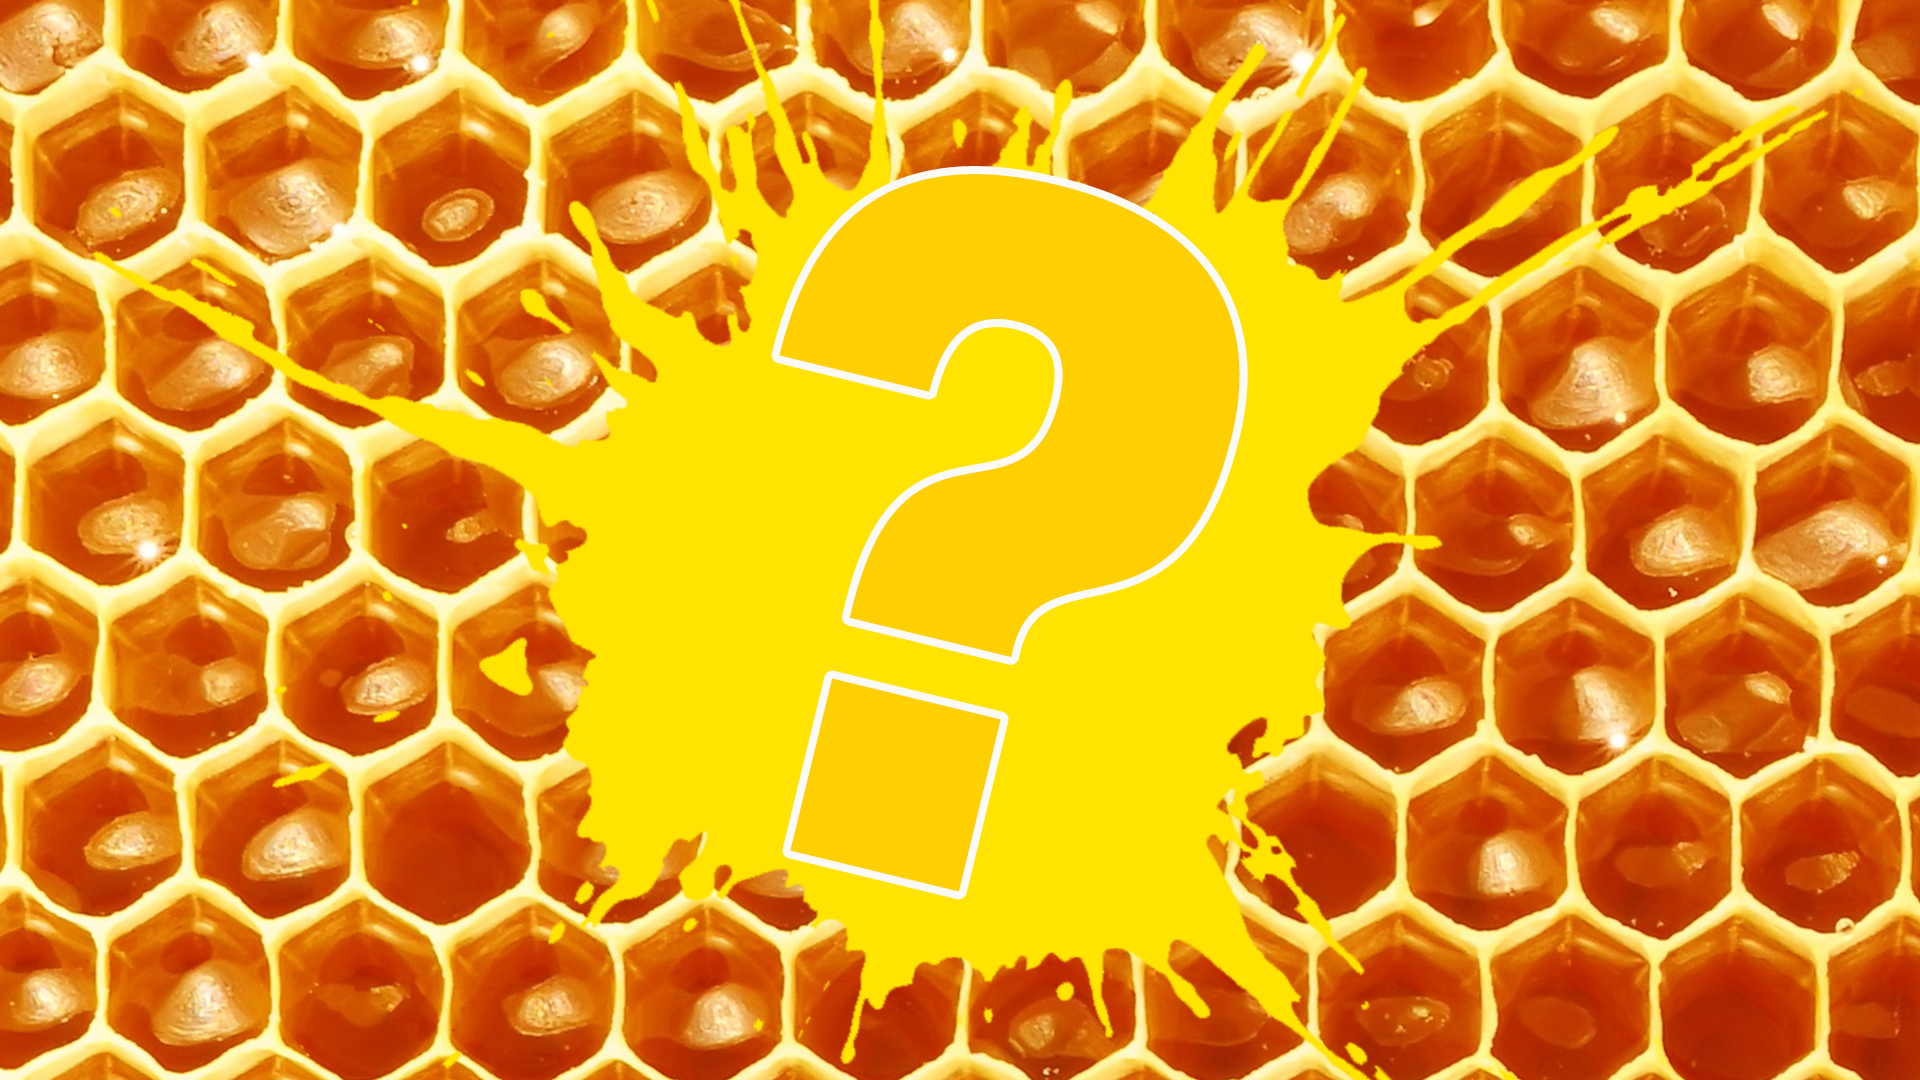 Question mark on yellow splat and honeycomb background